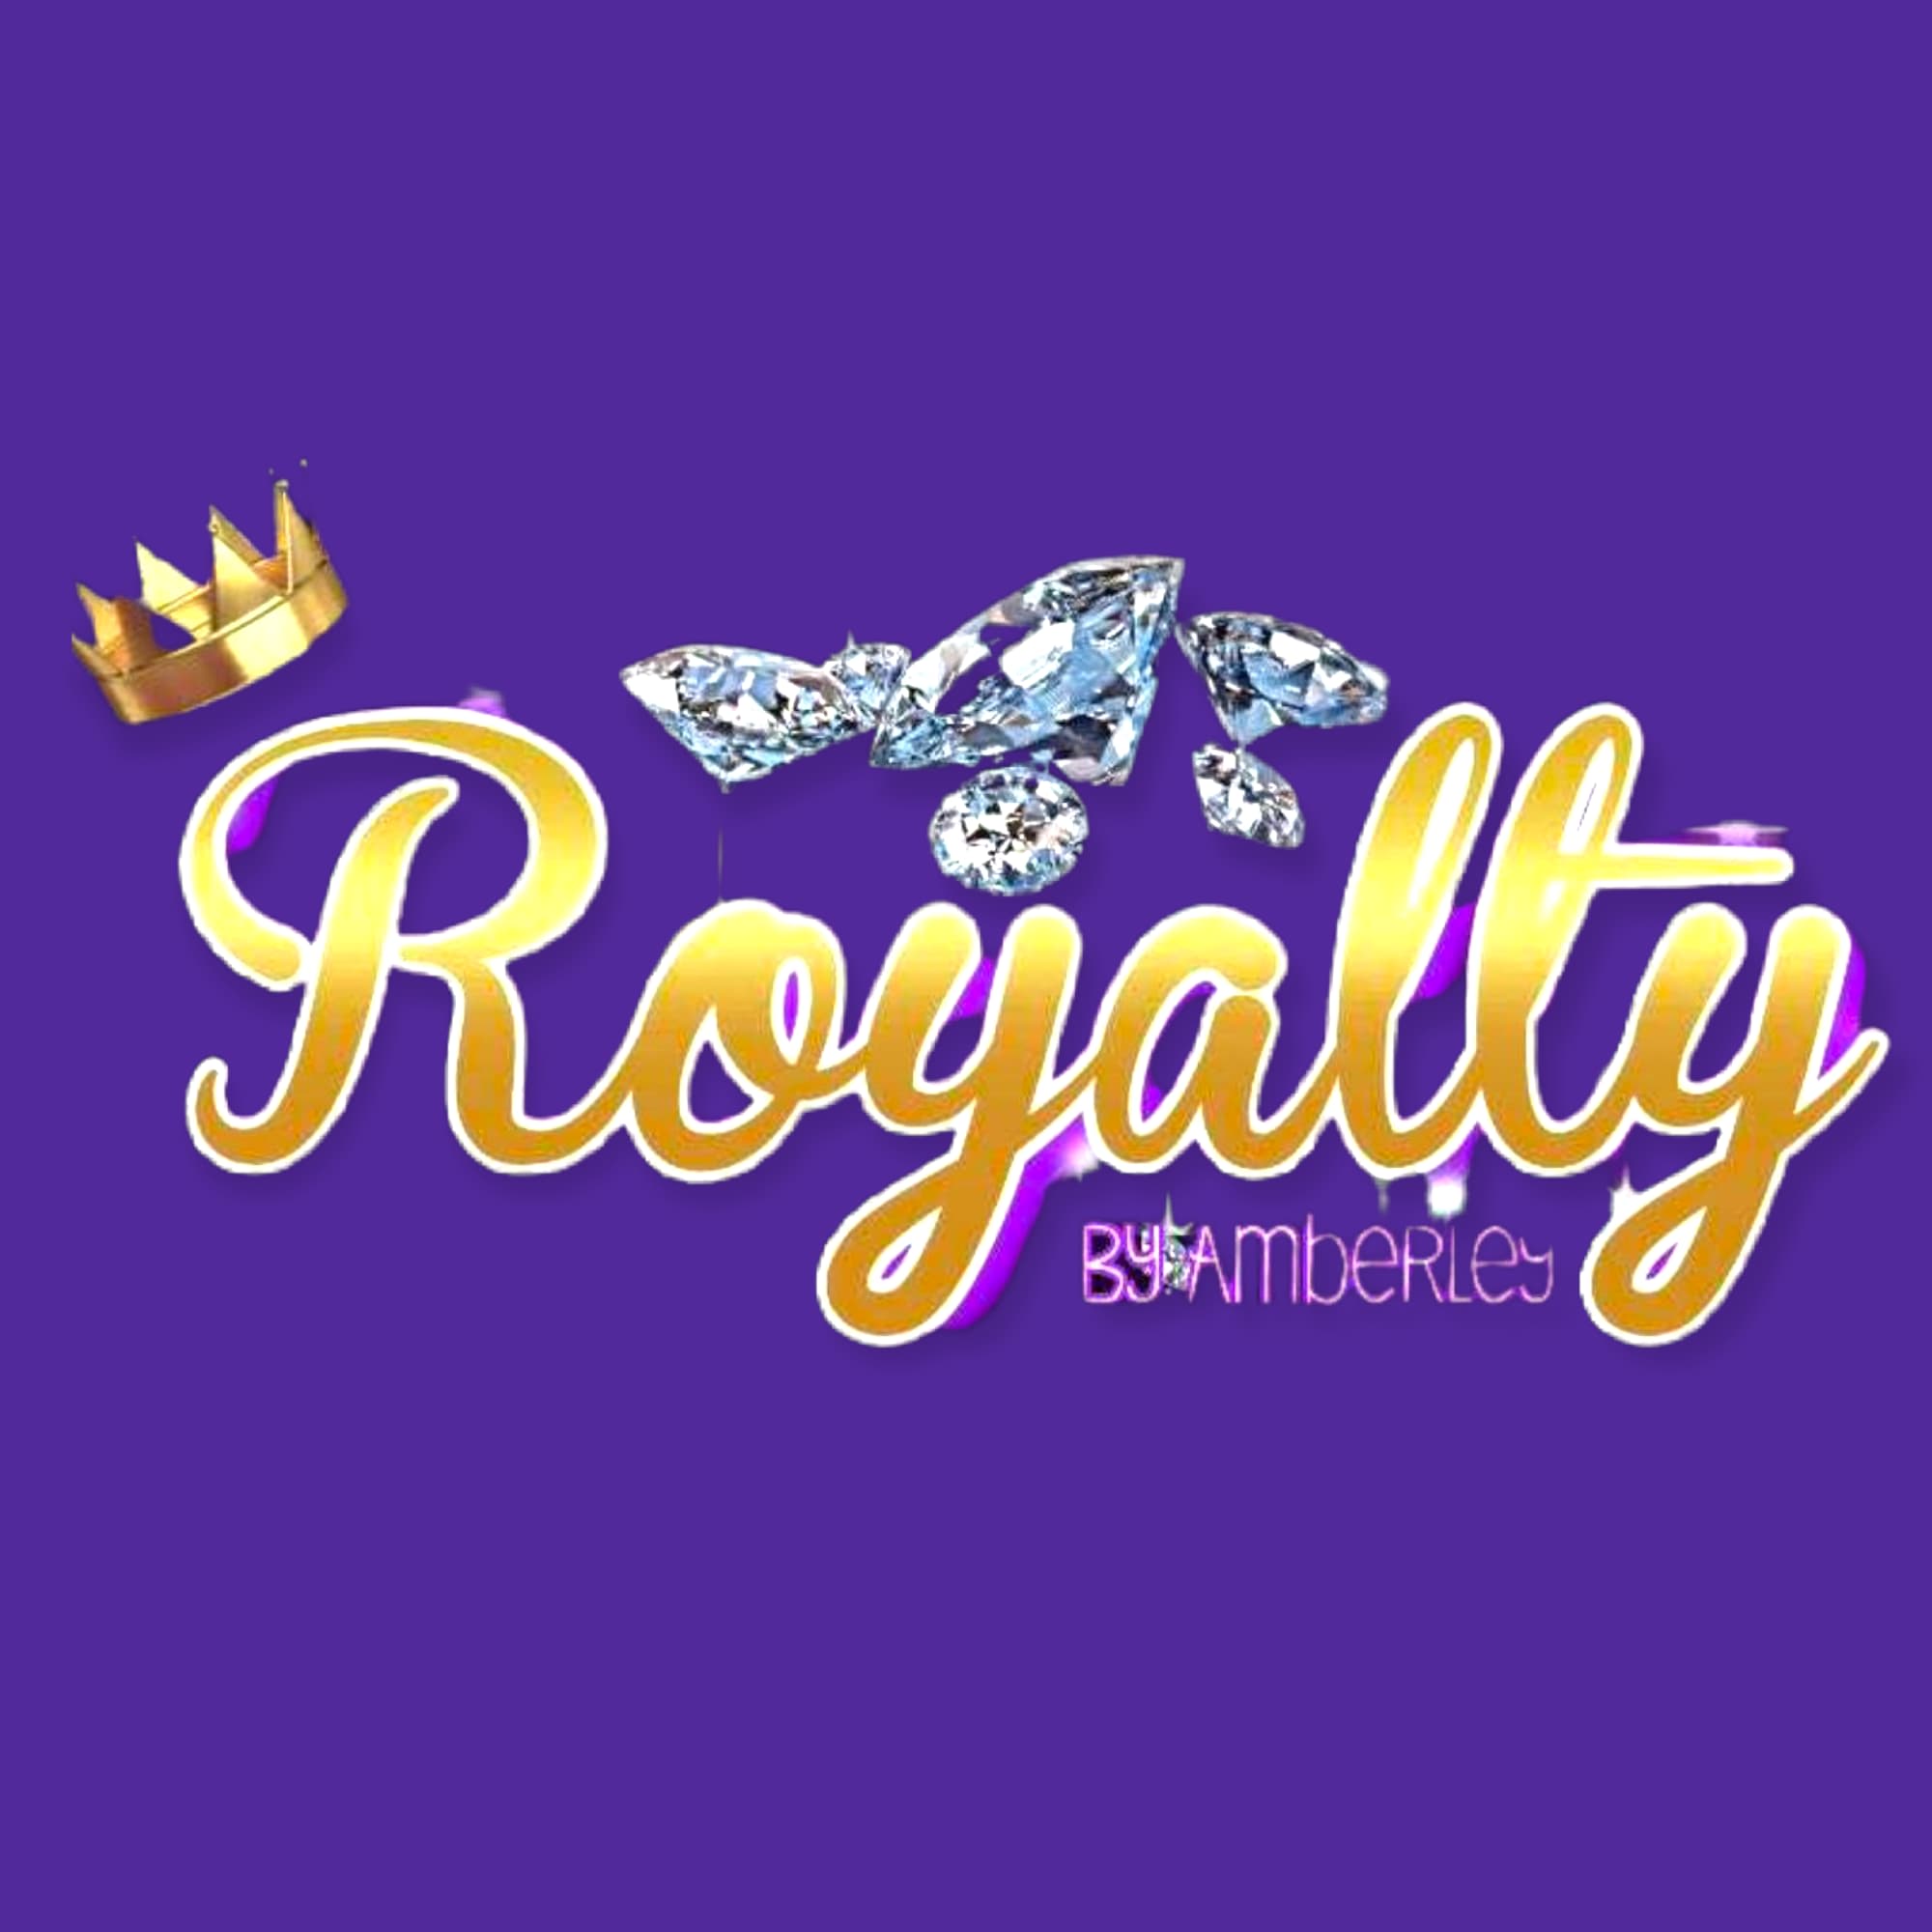 Royalty by Amberley